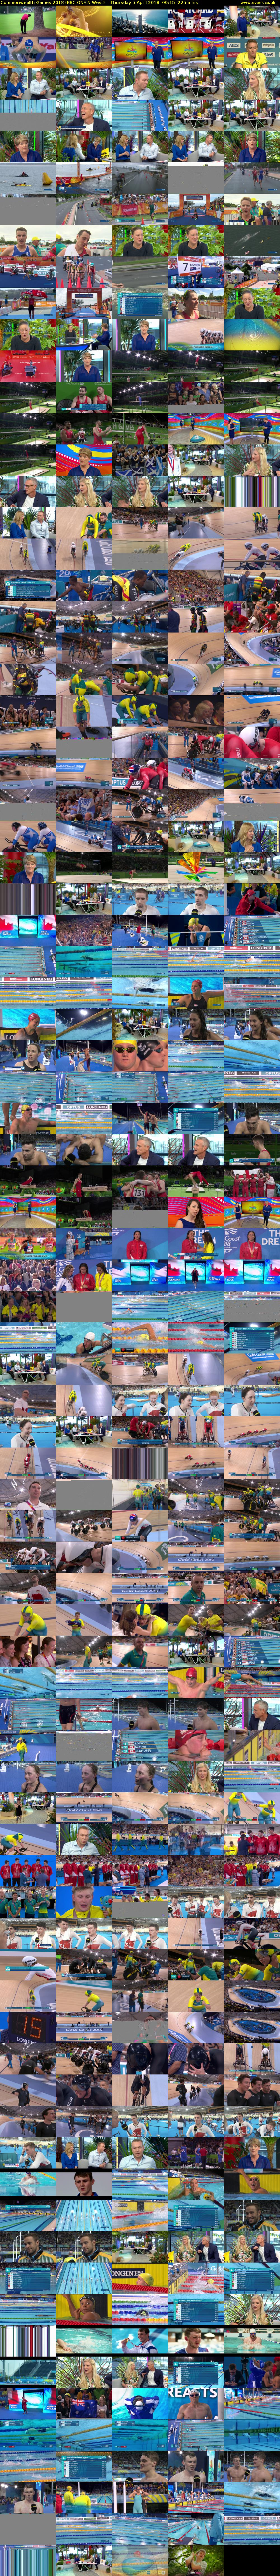 Commonwealth Games 2018 (BBC ONE N West) Thursday 5 April 2018 09:15 - 13:00